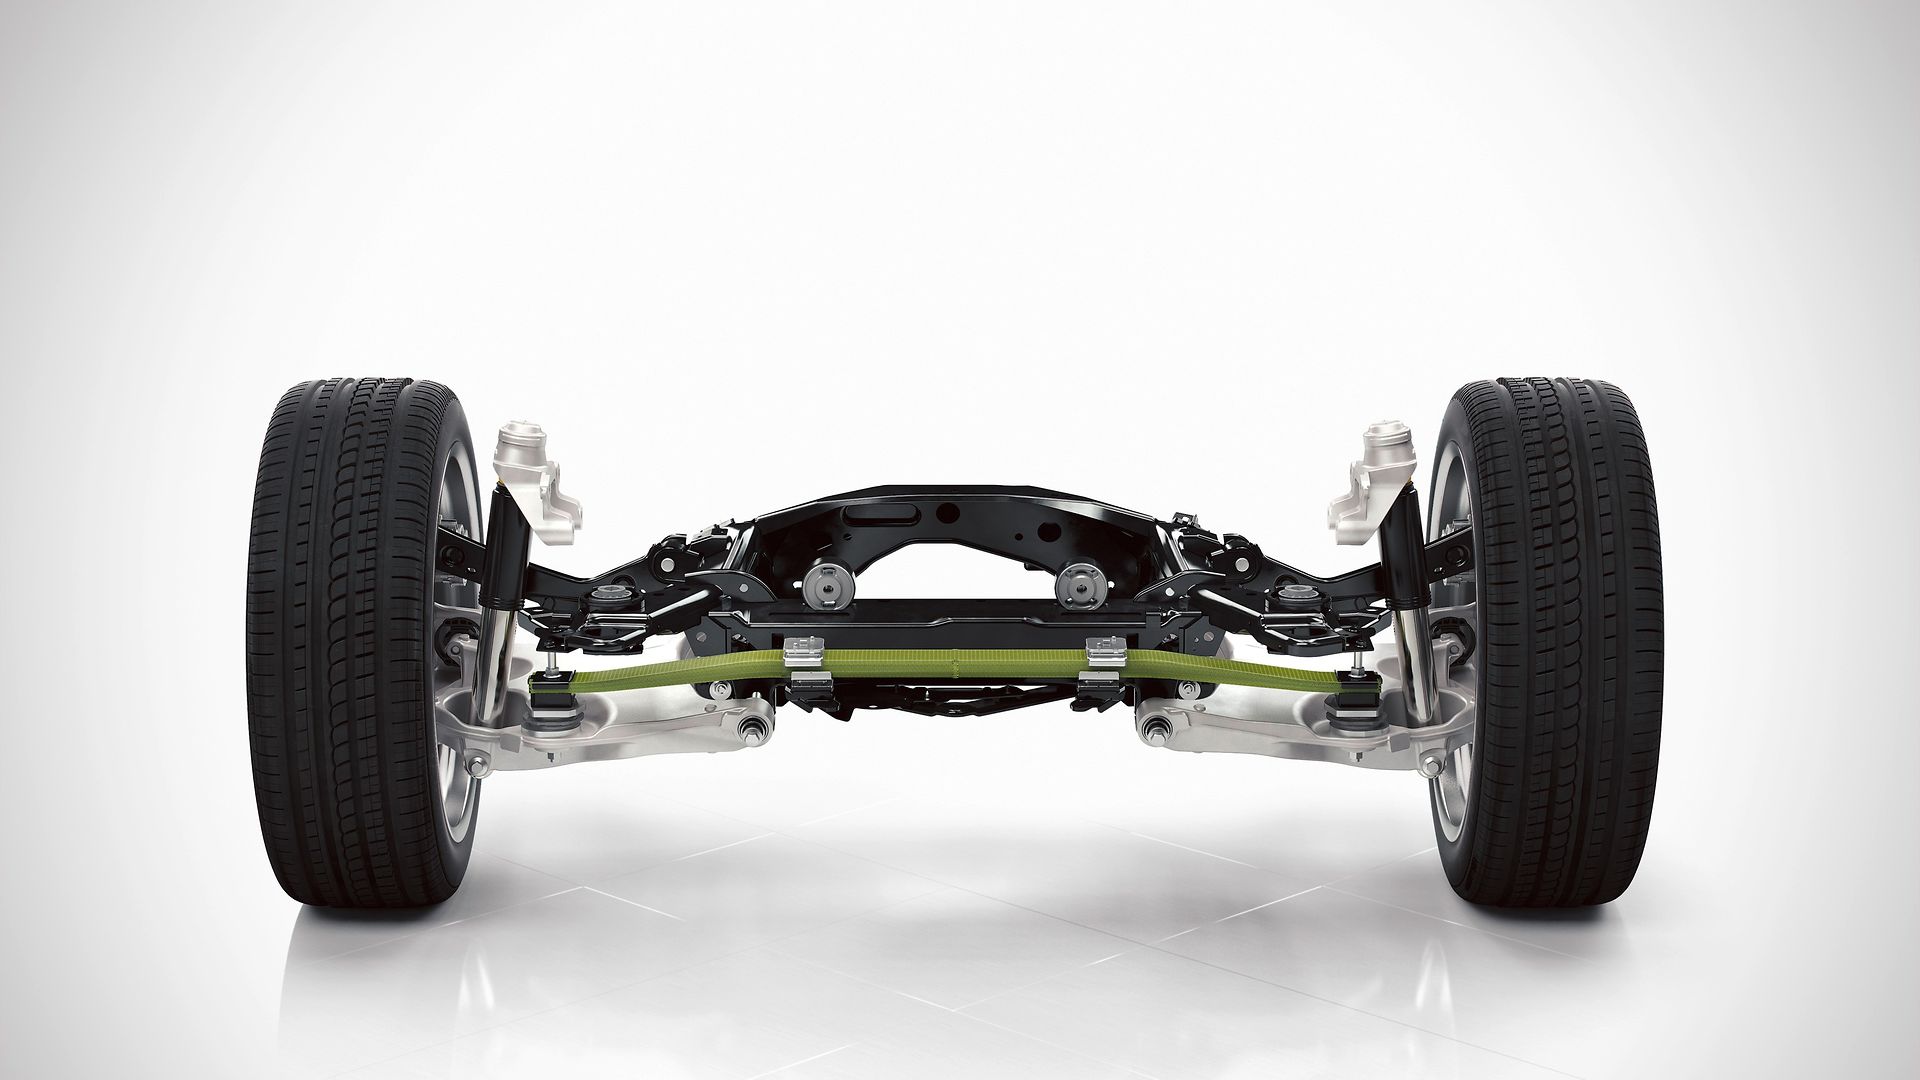 The rear axle of the new Volvo XC90 features a new transverse leaf spring